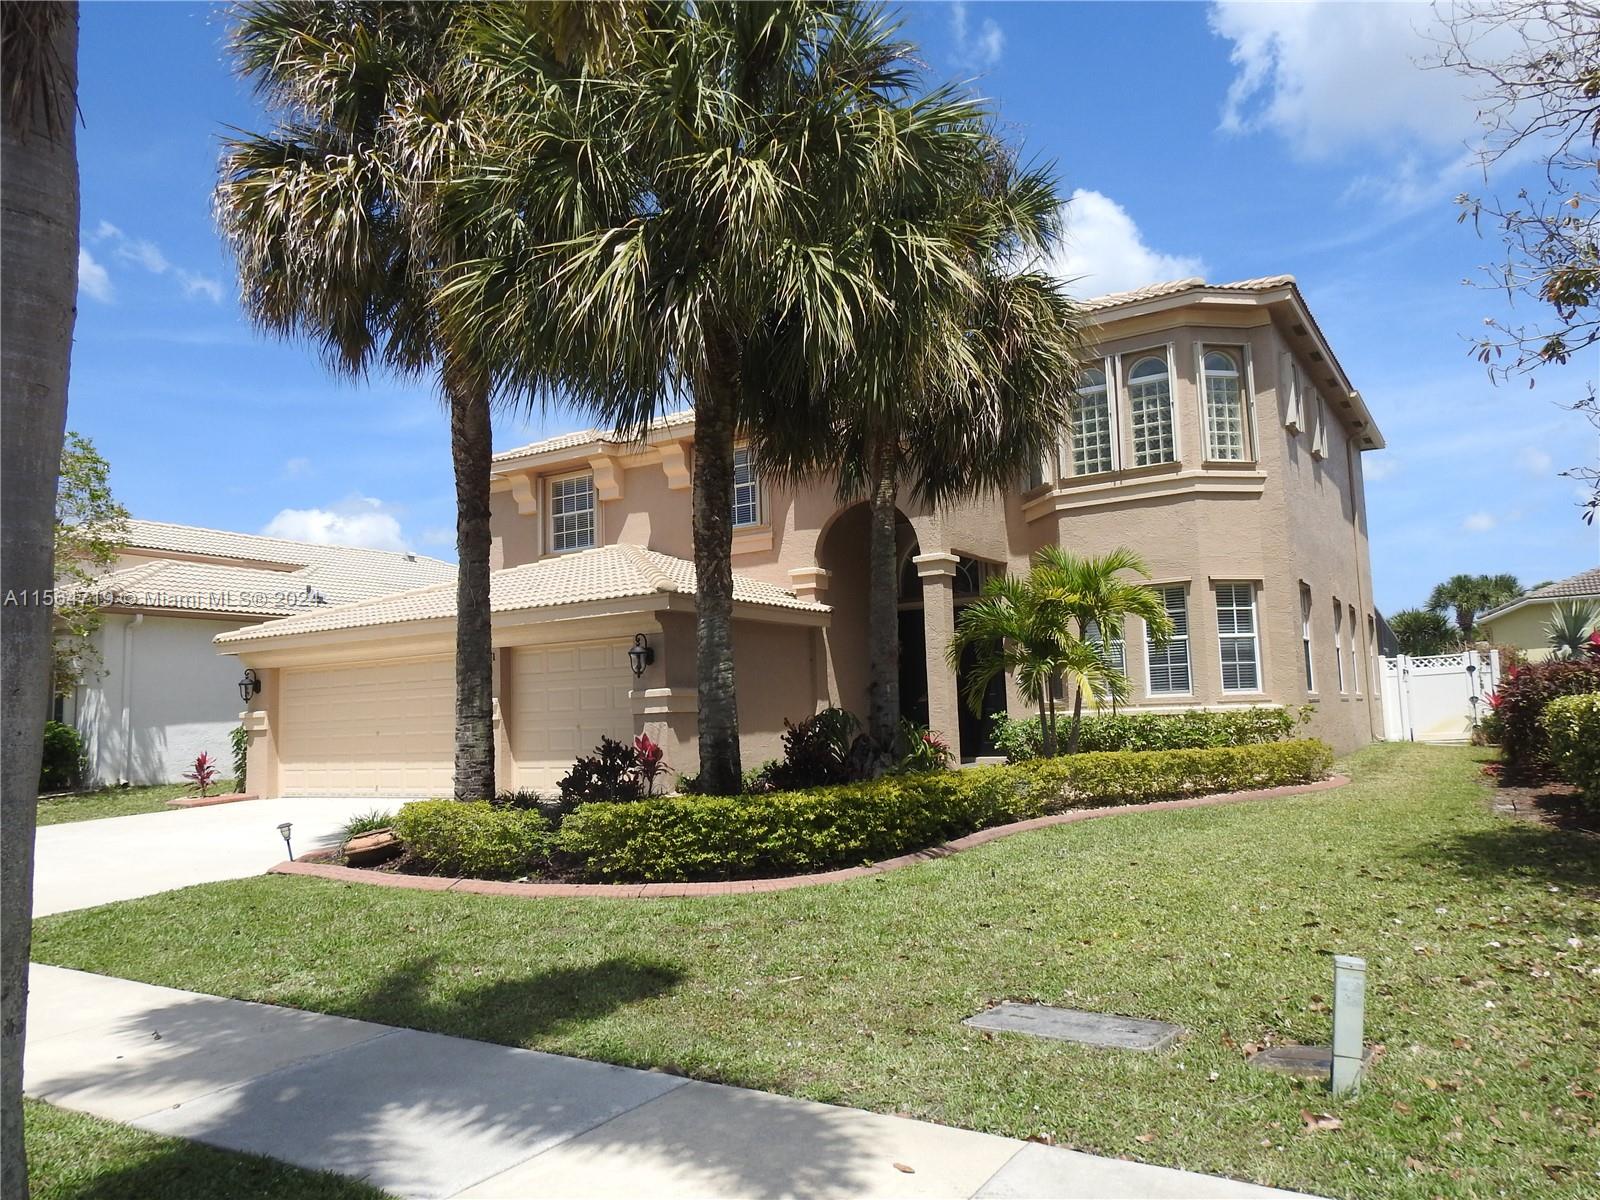 2131 Bellcrest Ct Ct, Royal Palm Beach, Palm Beach County, Florida - 5 Bedrooms  
3 Bathrooms - 